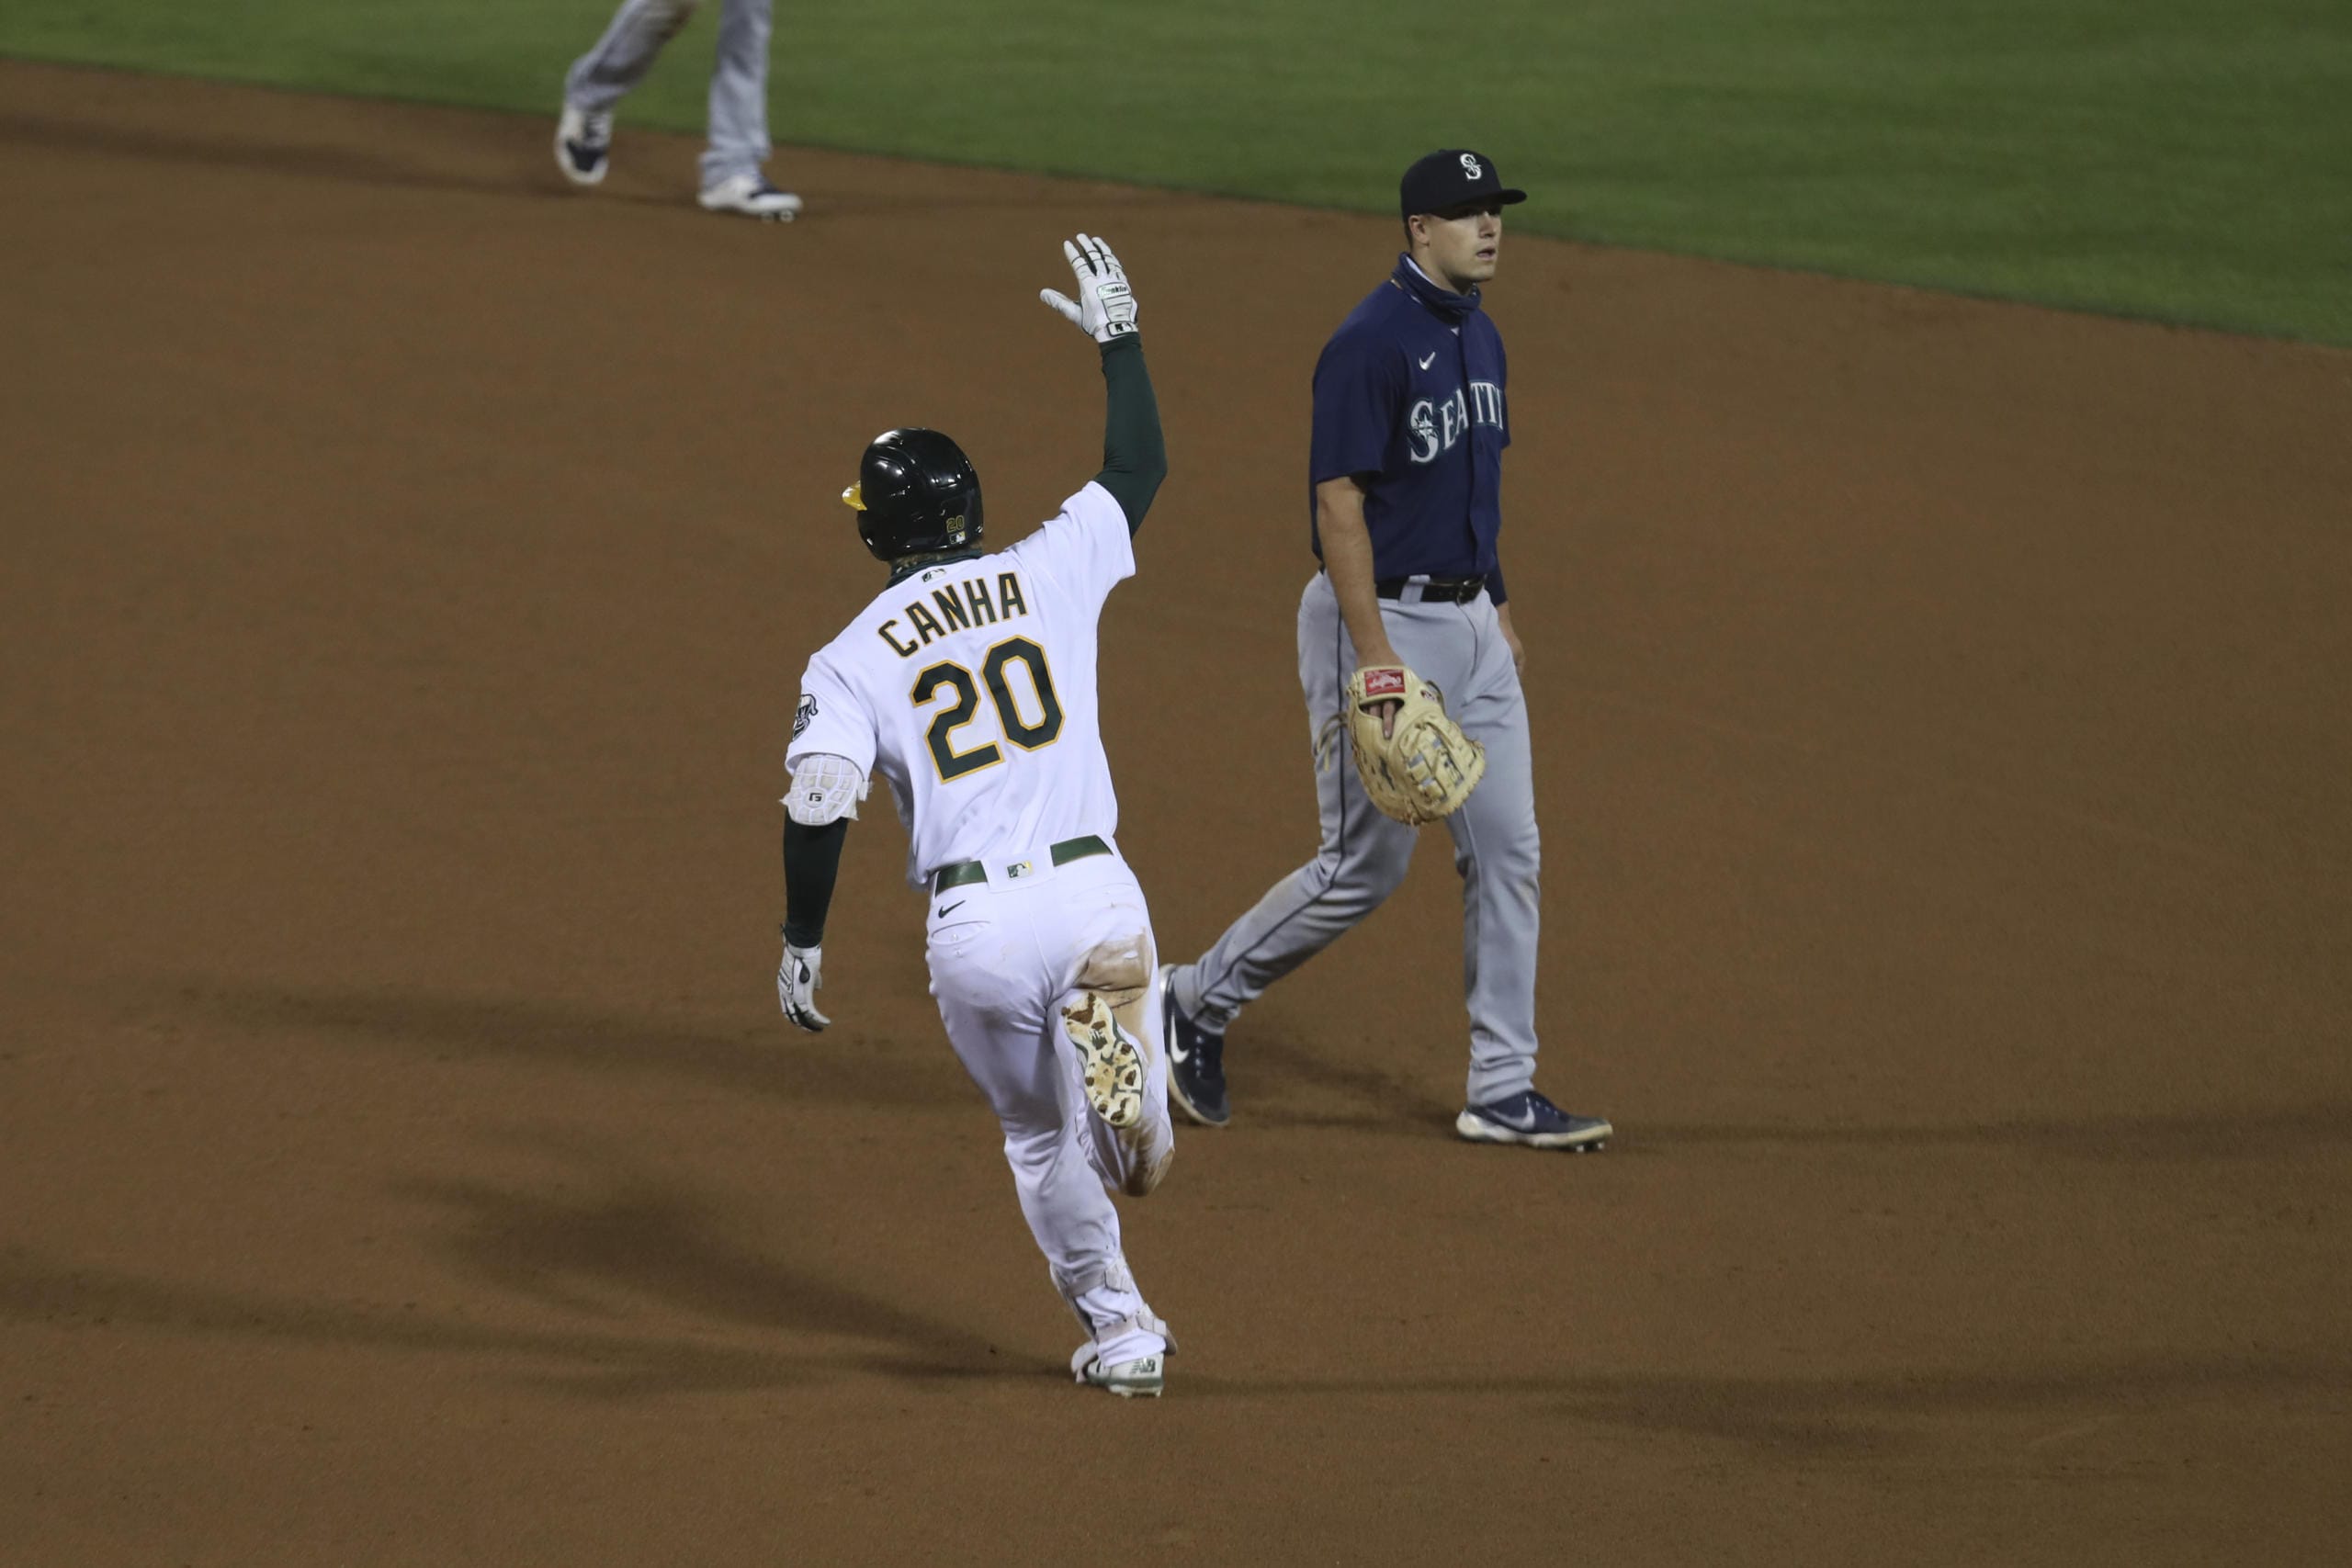 Oakland Athletics' Mark Canha (20) celebrates after hitting a game winning home run, while running past Seattle Mariners' Evan White during the 10th inning of a baseball game in Oakland, Calif., Friday, Sept. 25, 2020.